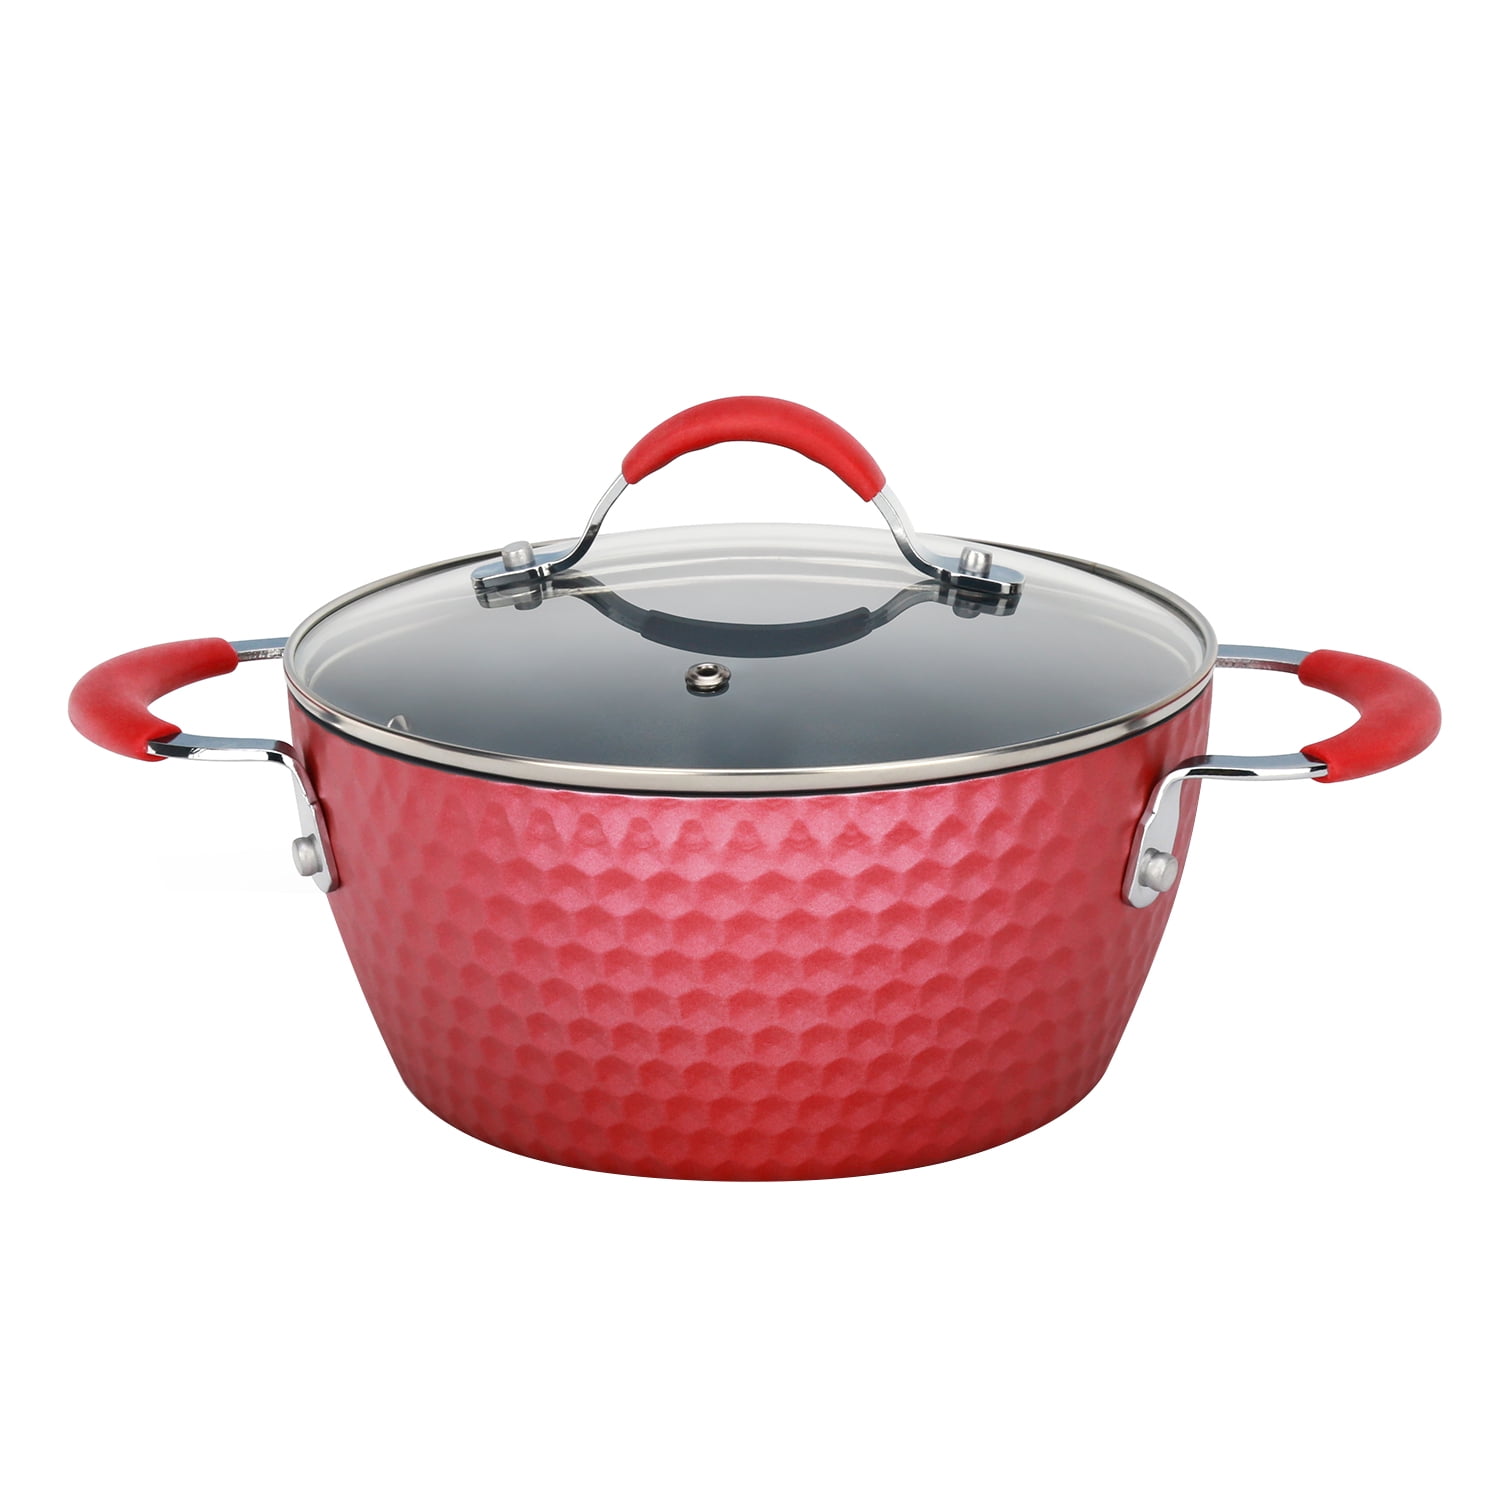 3.6 Quart Non-Stick High-Qualified Kitchen Cookware Dutch Oven Pot with Lid Works with Model: NCCW11BL